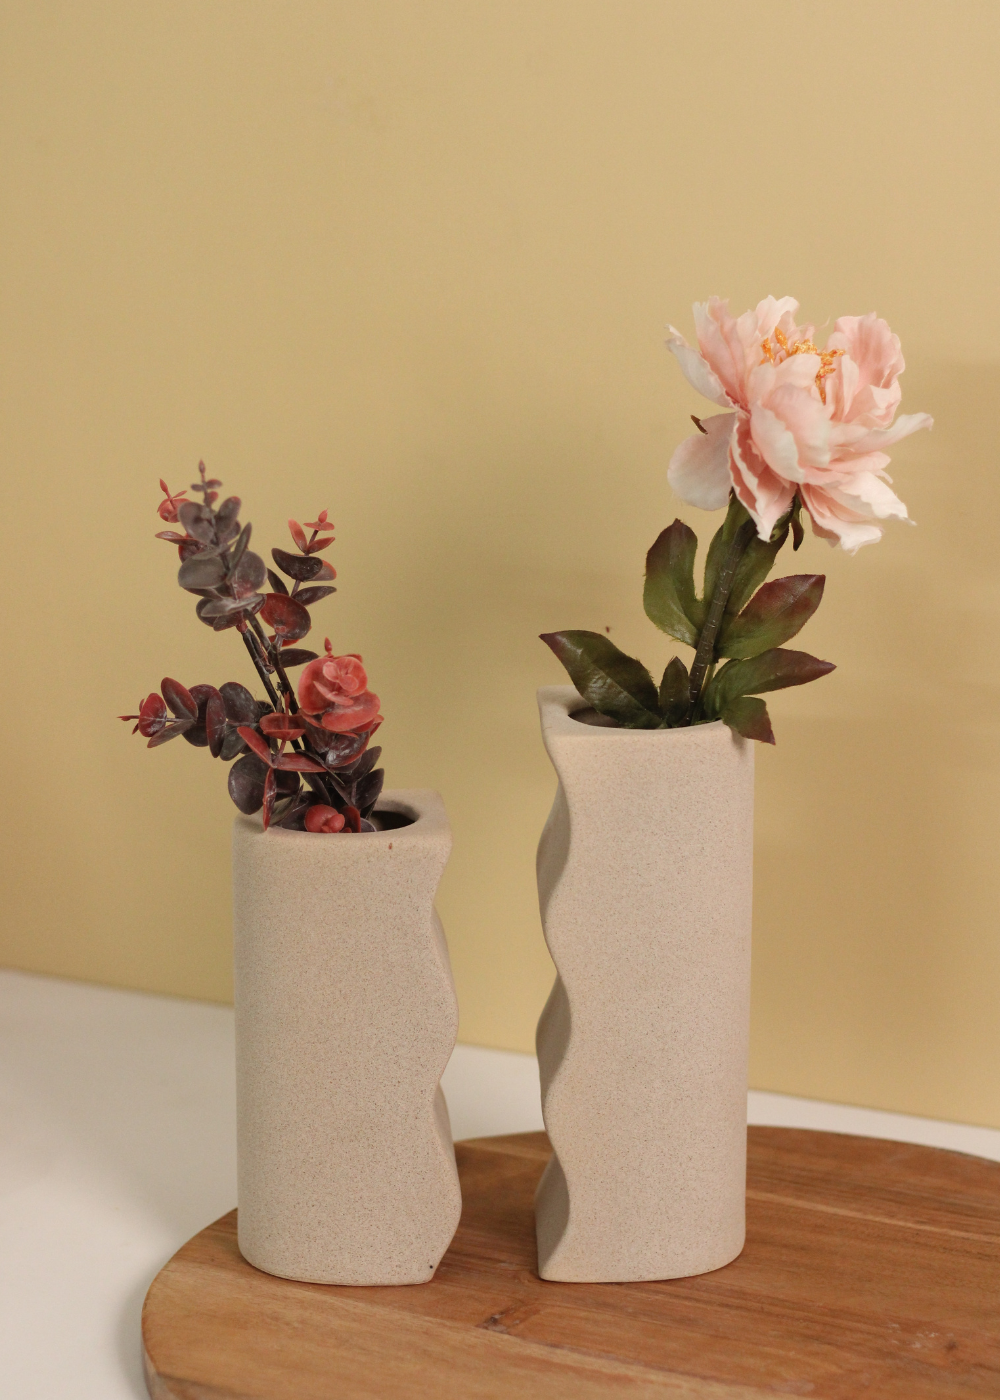 Two vases long and short with flowers on a wooden surface